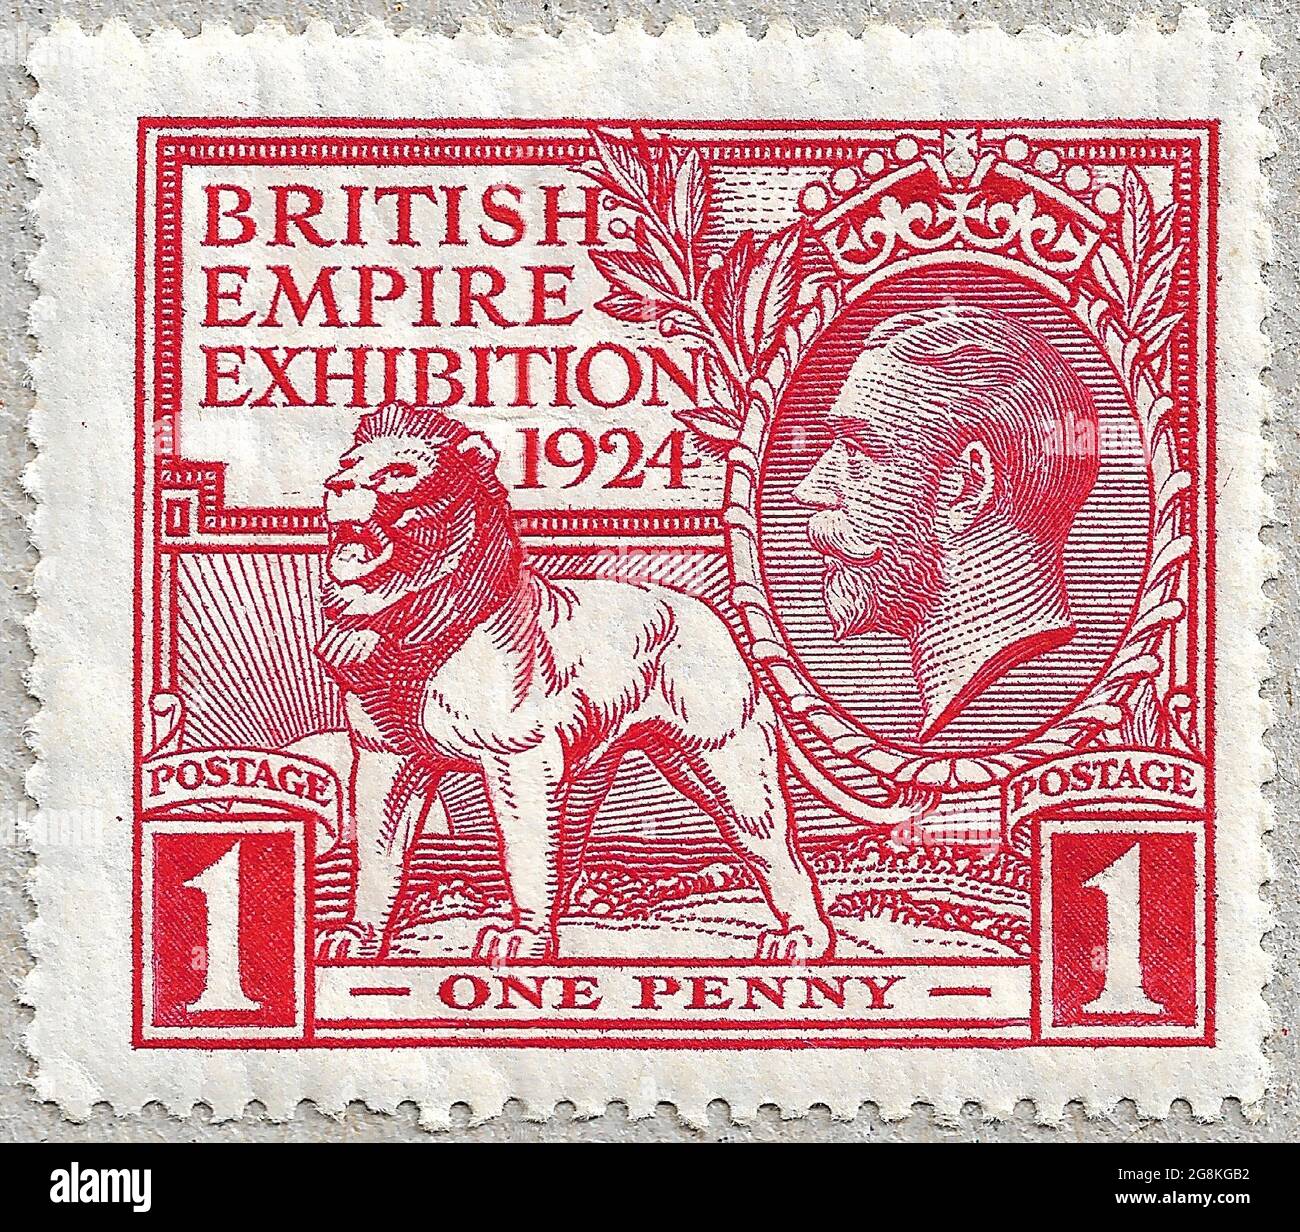 1924 British Empire Exhibition 'Wembley' Stamps (Great Britain, King George V) One Penny Red Designed by H. Nelson. Printing plates engraved by J. A. C. Harrison. Printed by Waterlow and Sons. Stock Photo